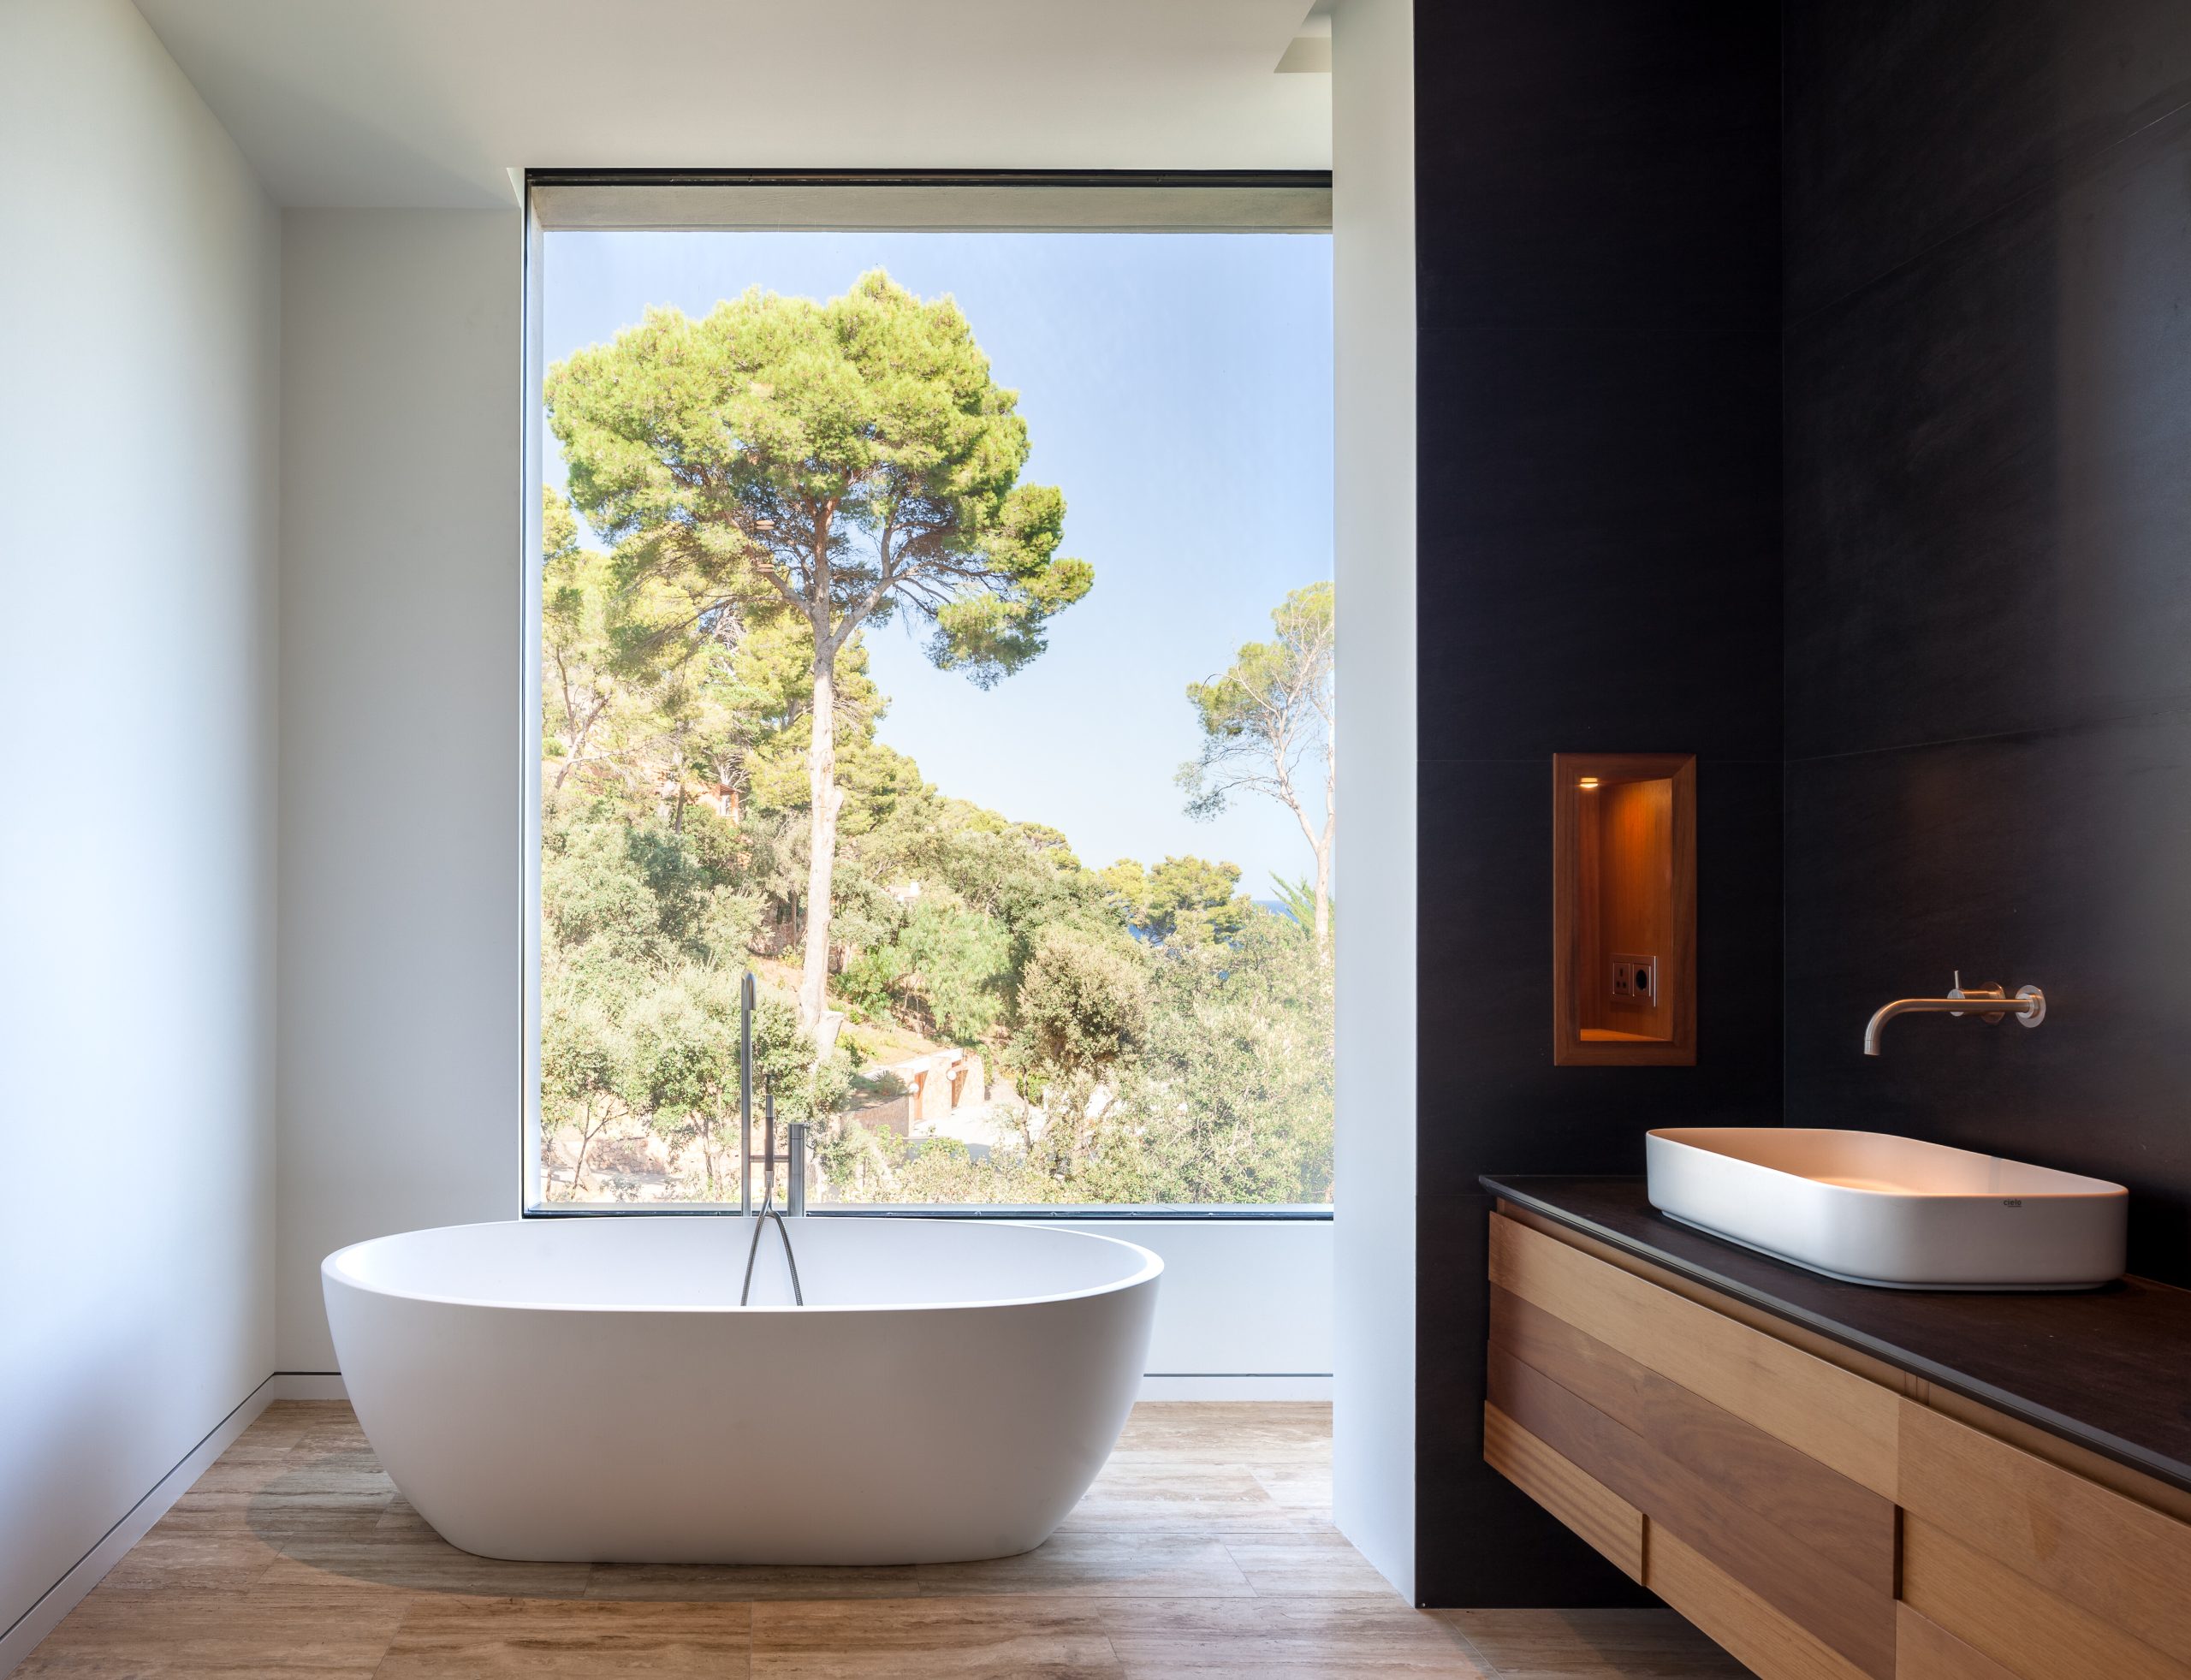 5 Tips for Building Your Dream Home in Spain